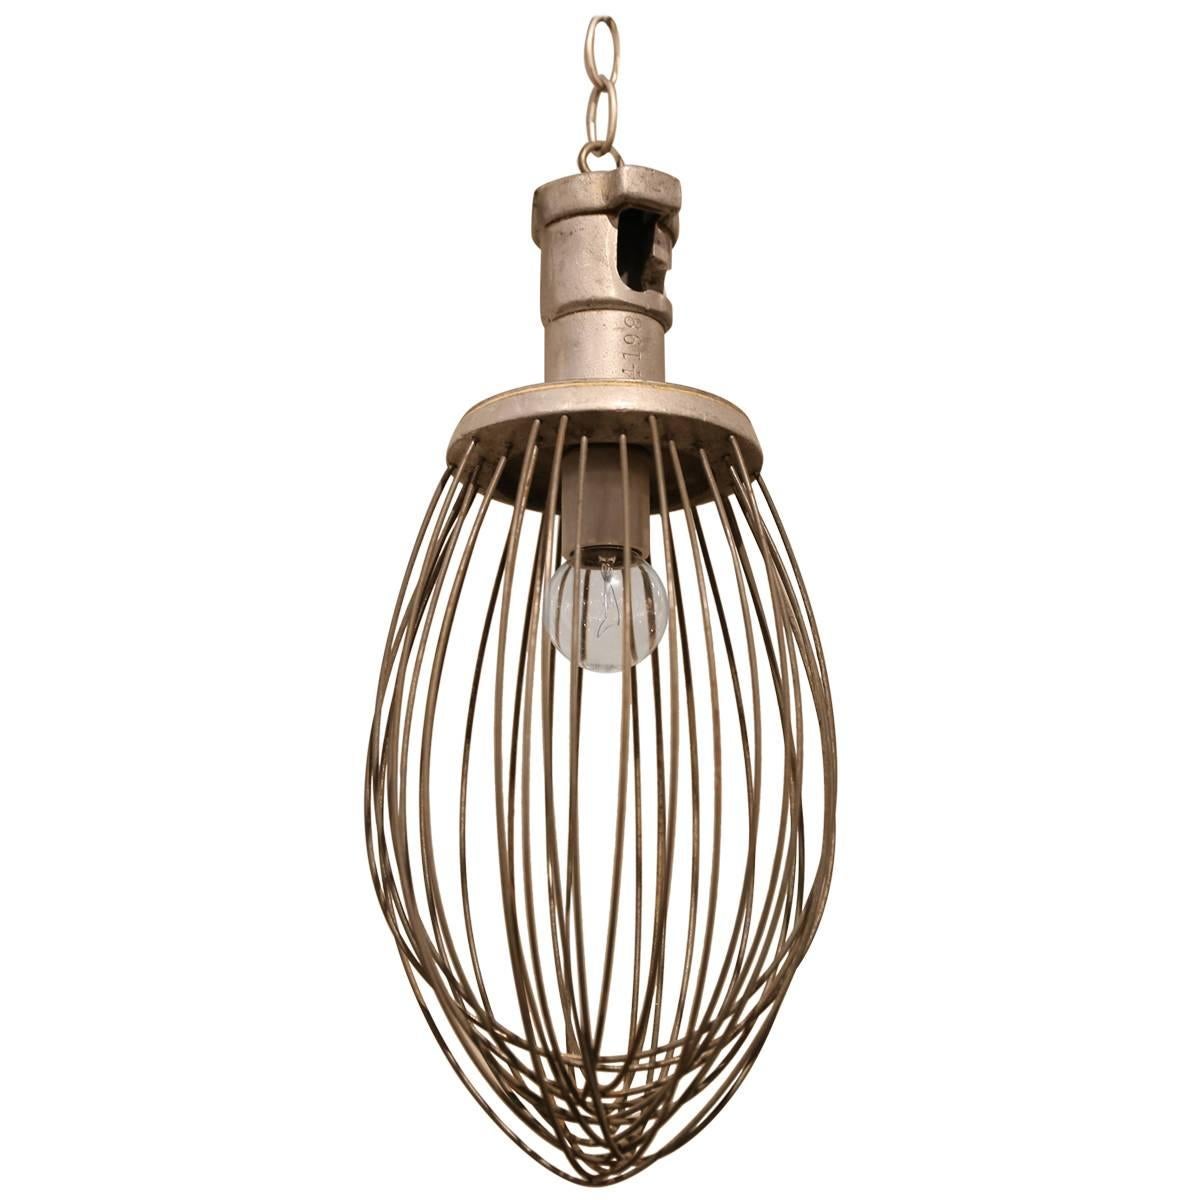 Pendant Light Fixture from Vintage Bakery Whisk For Sale